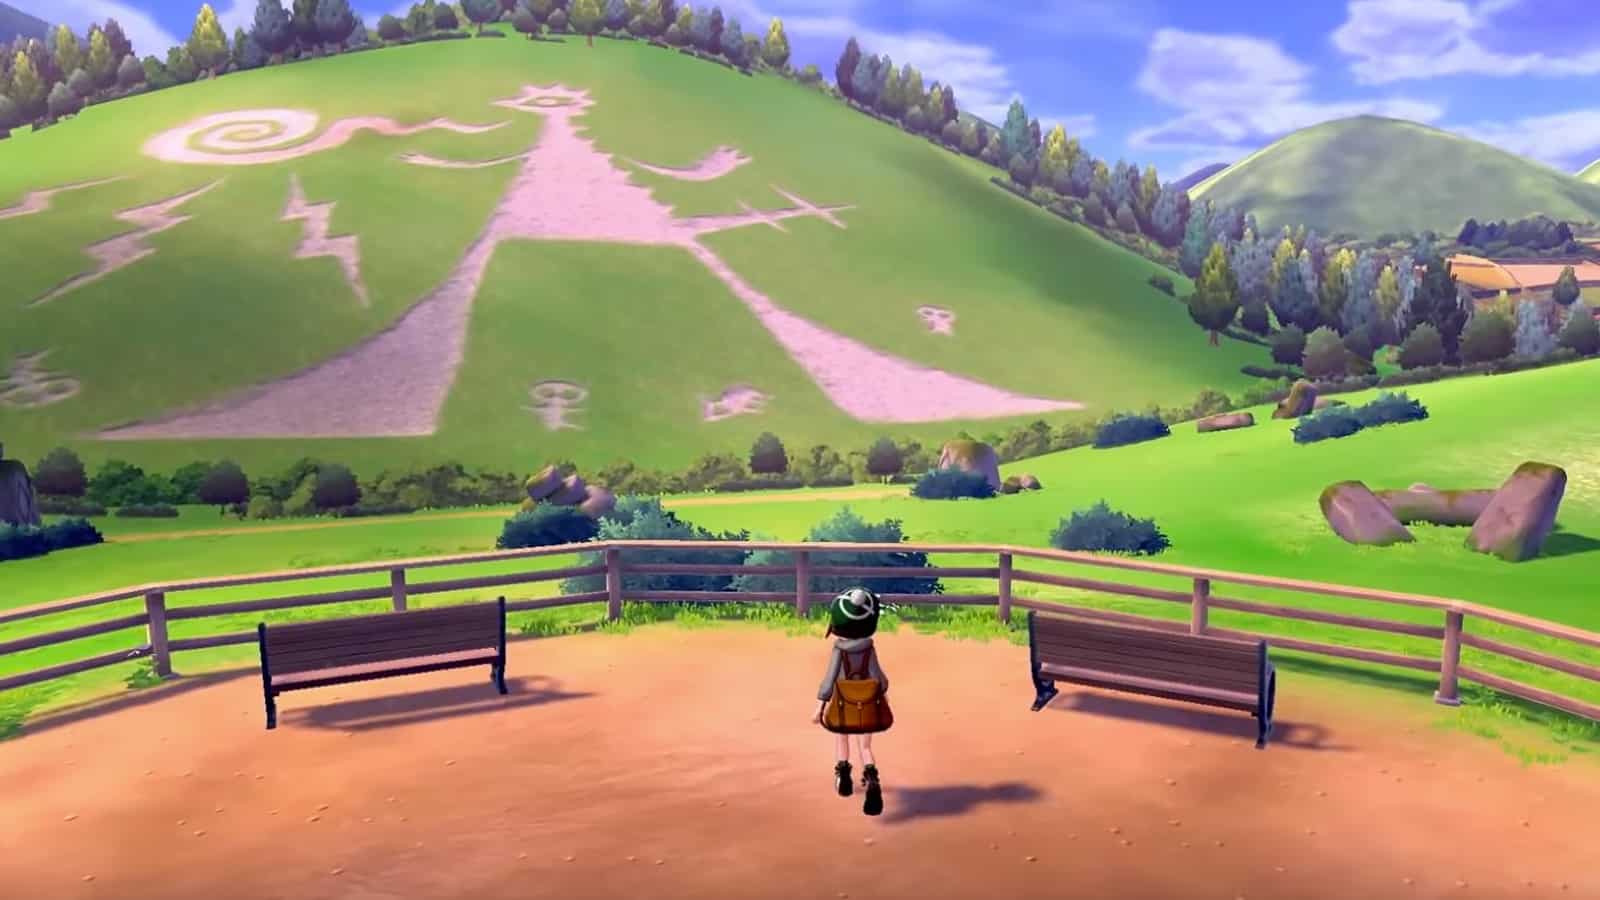 New Pokemon Scarlet & Violet gameplay mechanic possibly hinted at in Gen 9  trailer - Dexerto